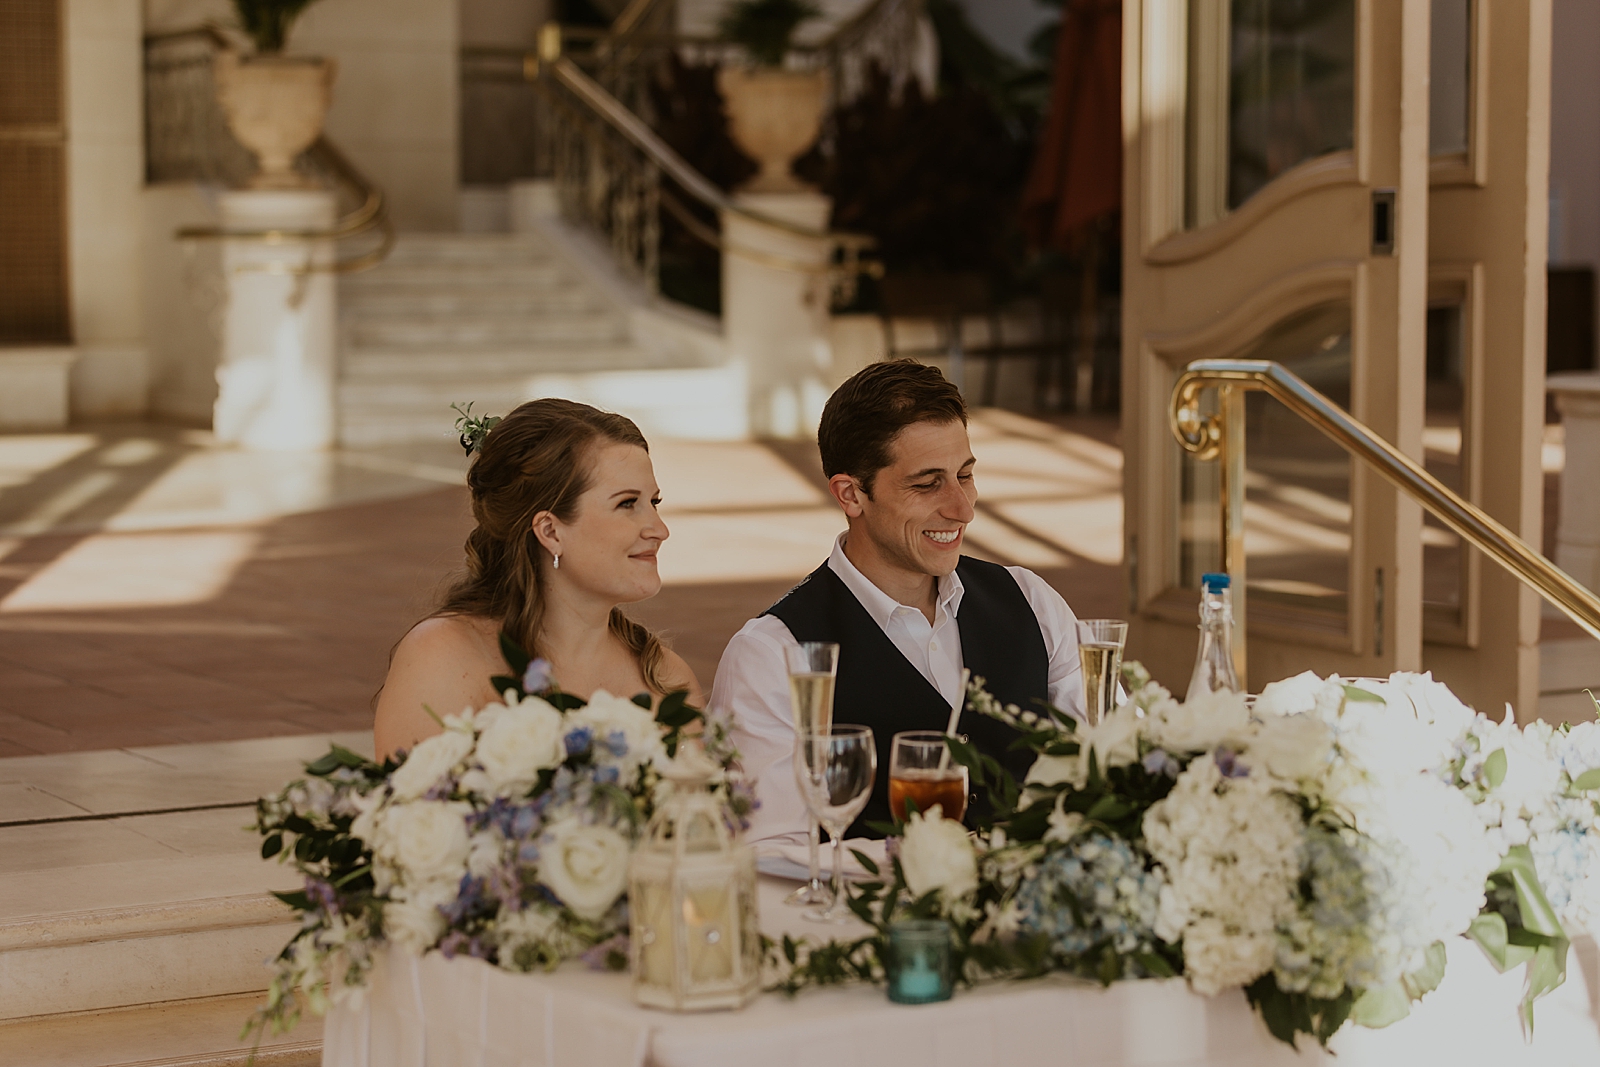 Bride and Groom sitting at sweetheart table together during speeches